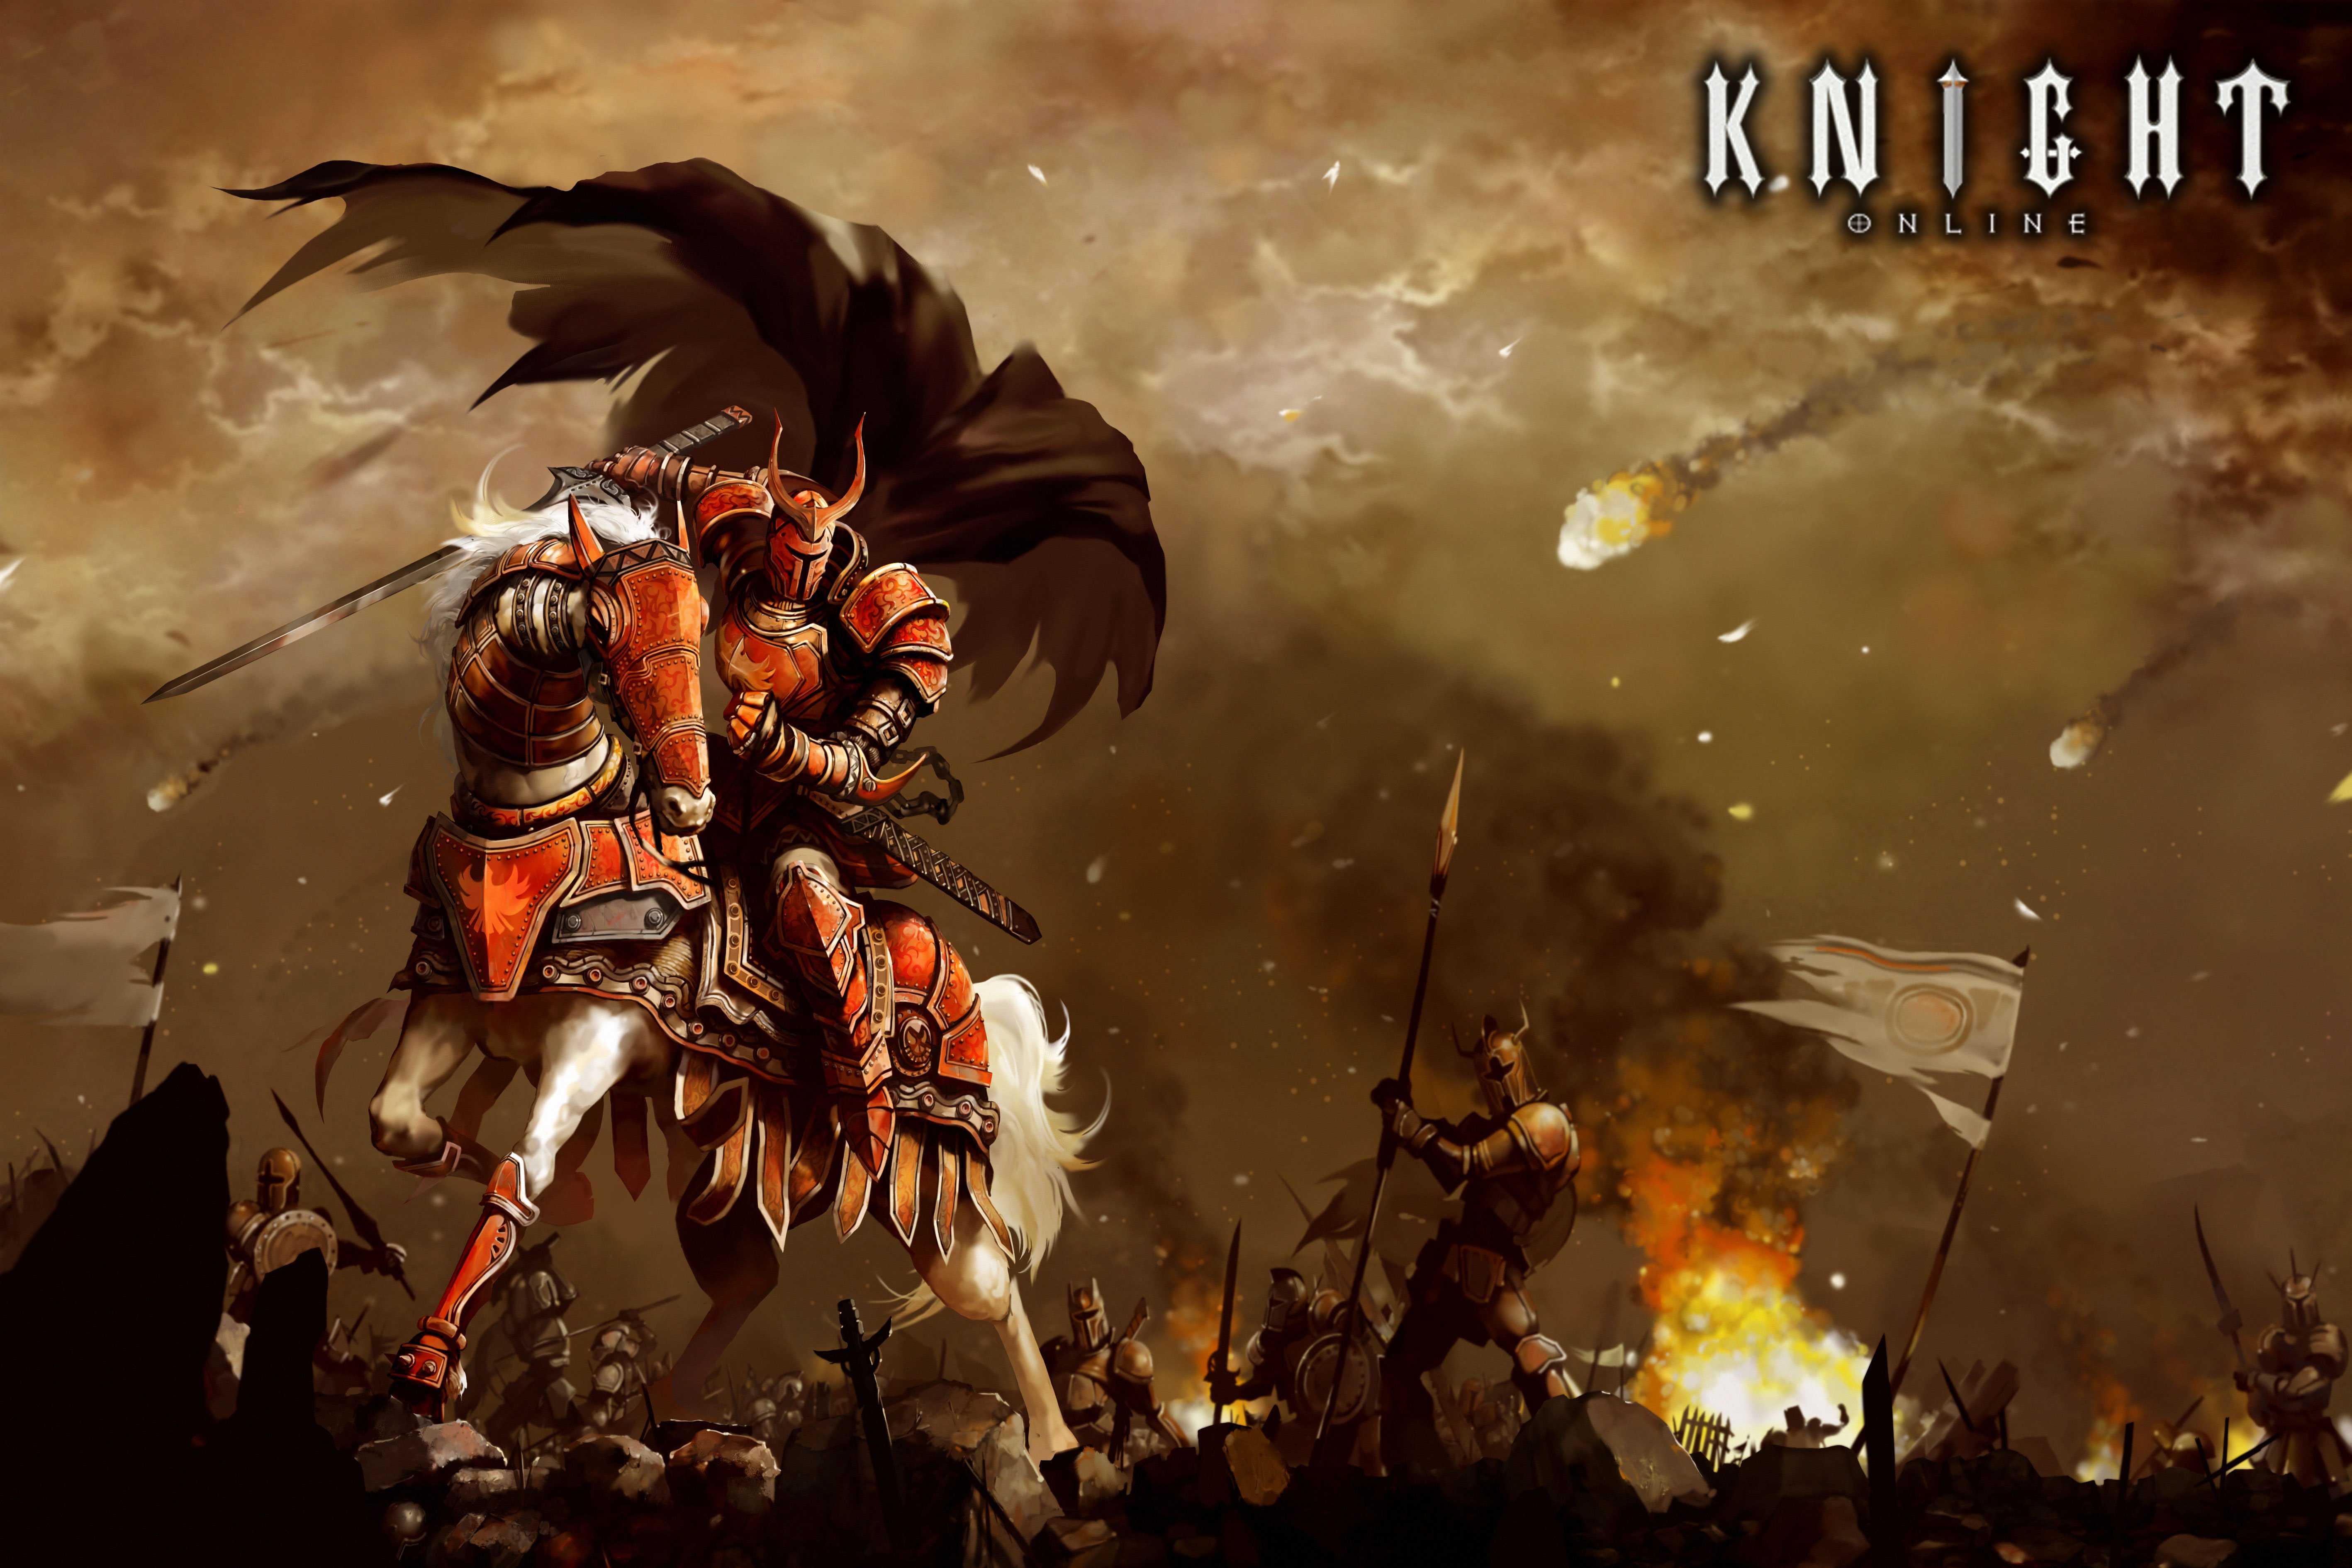 knight online wallpaper,action adventure game,strategy video game,pc game,cg artwork,mythology